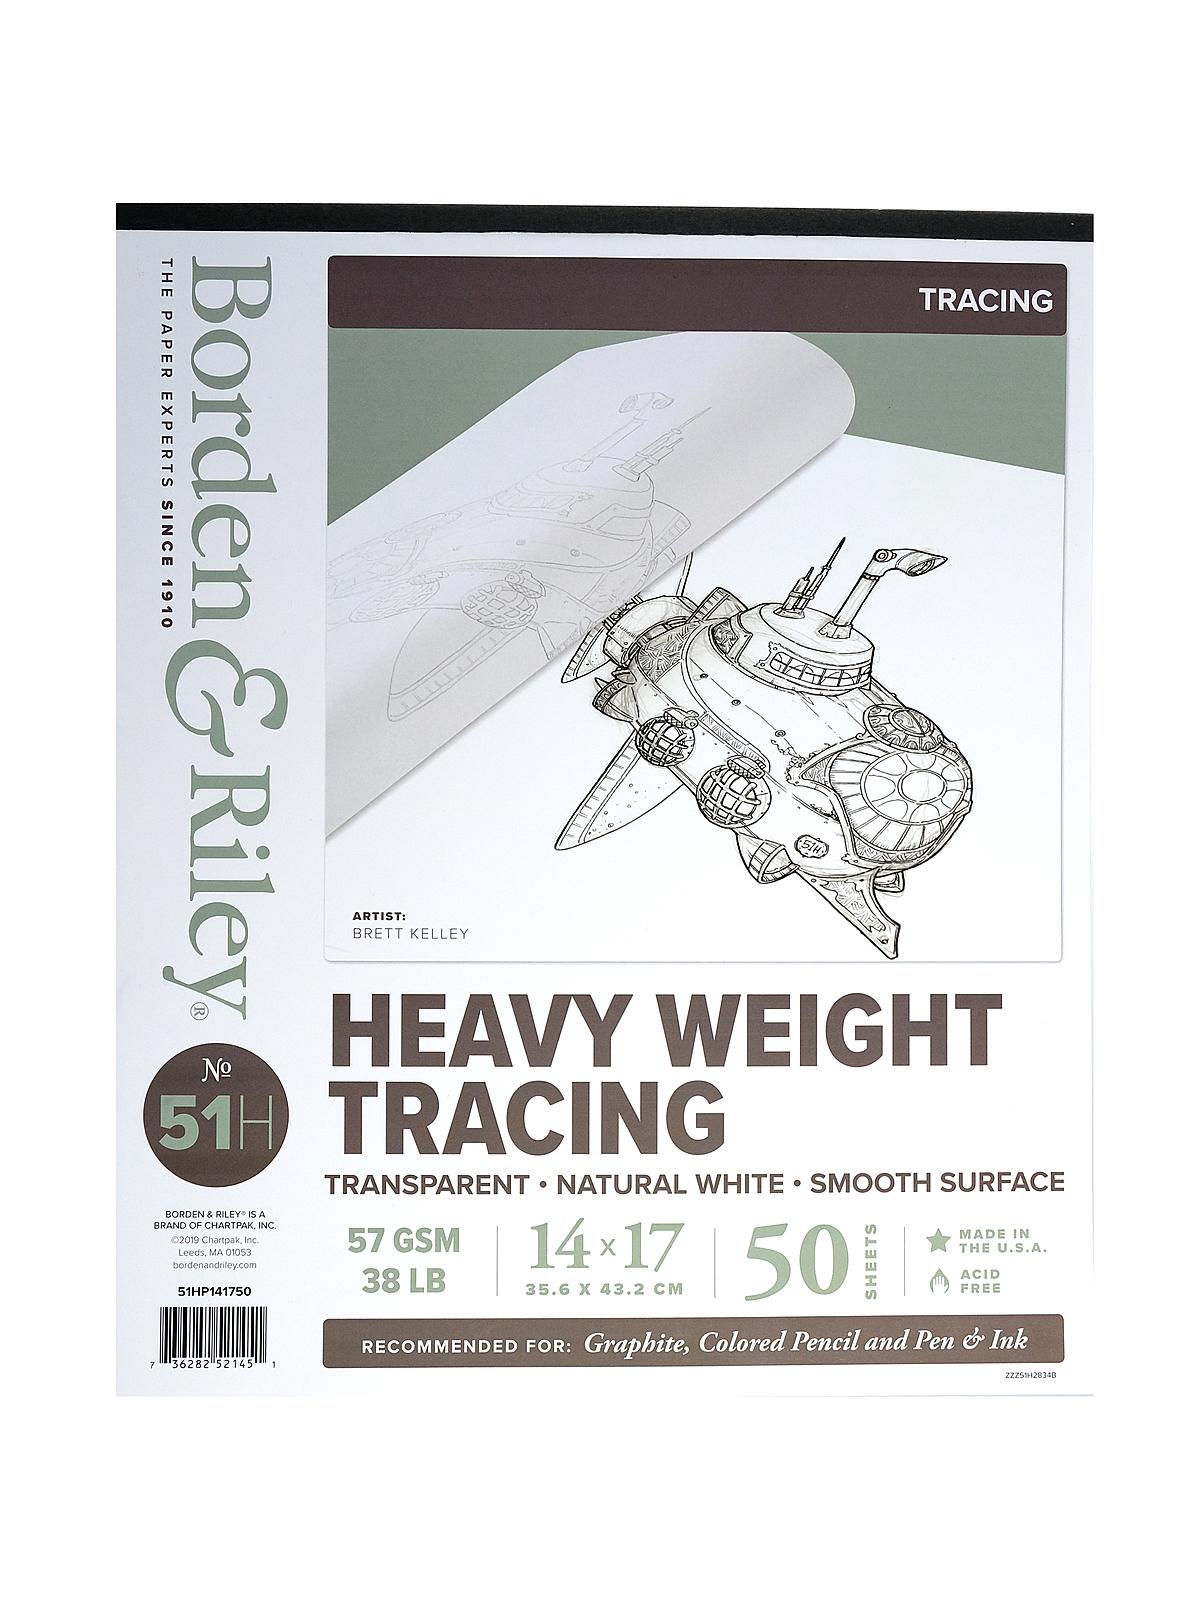 #51h Parchment Tracing Paper 14 In. X 17 In. Pad Of 50